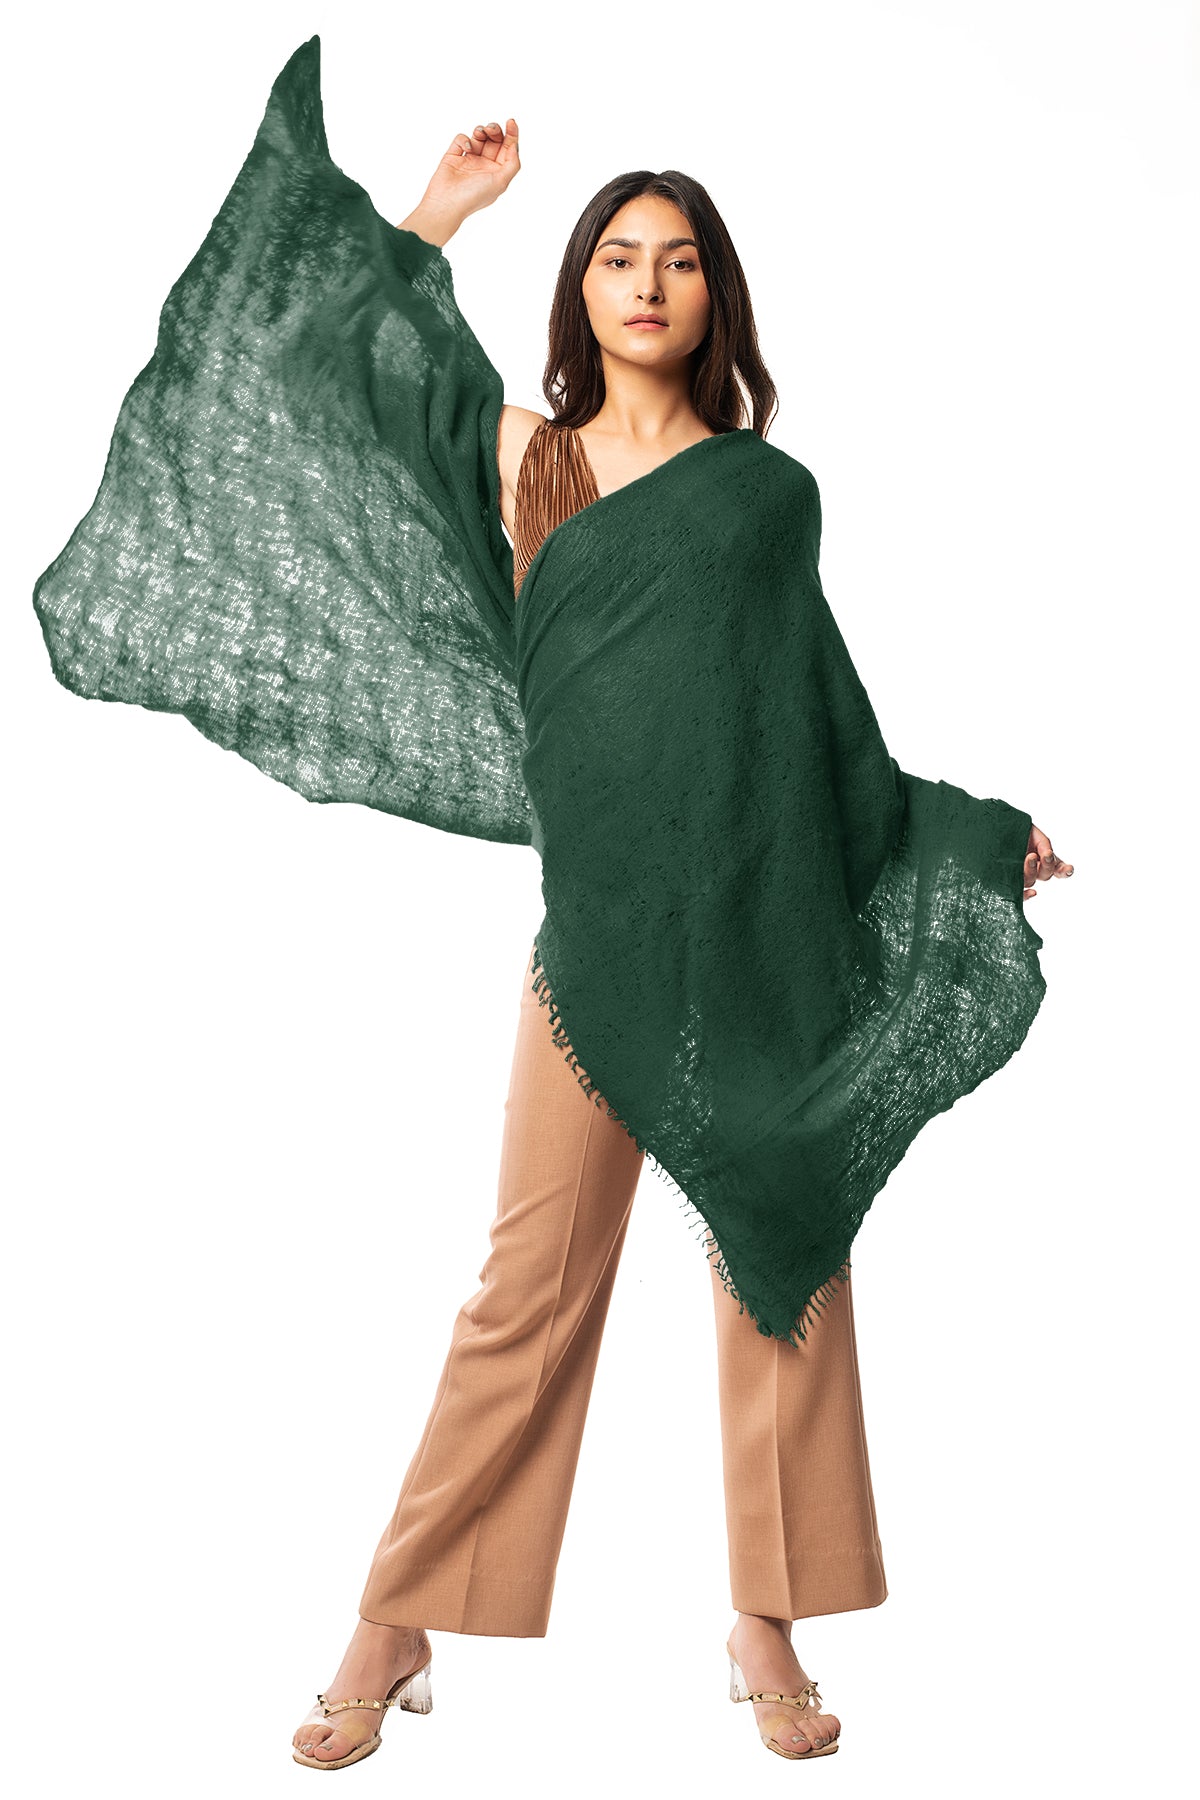 Elegant hand-knitted forest green cashmere scarf, felted for added warmth and durability